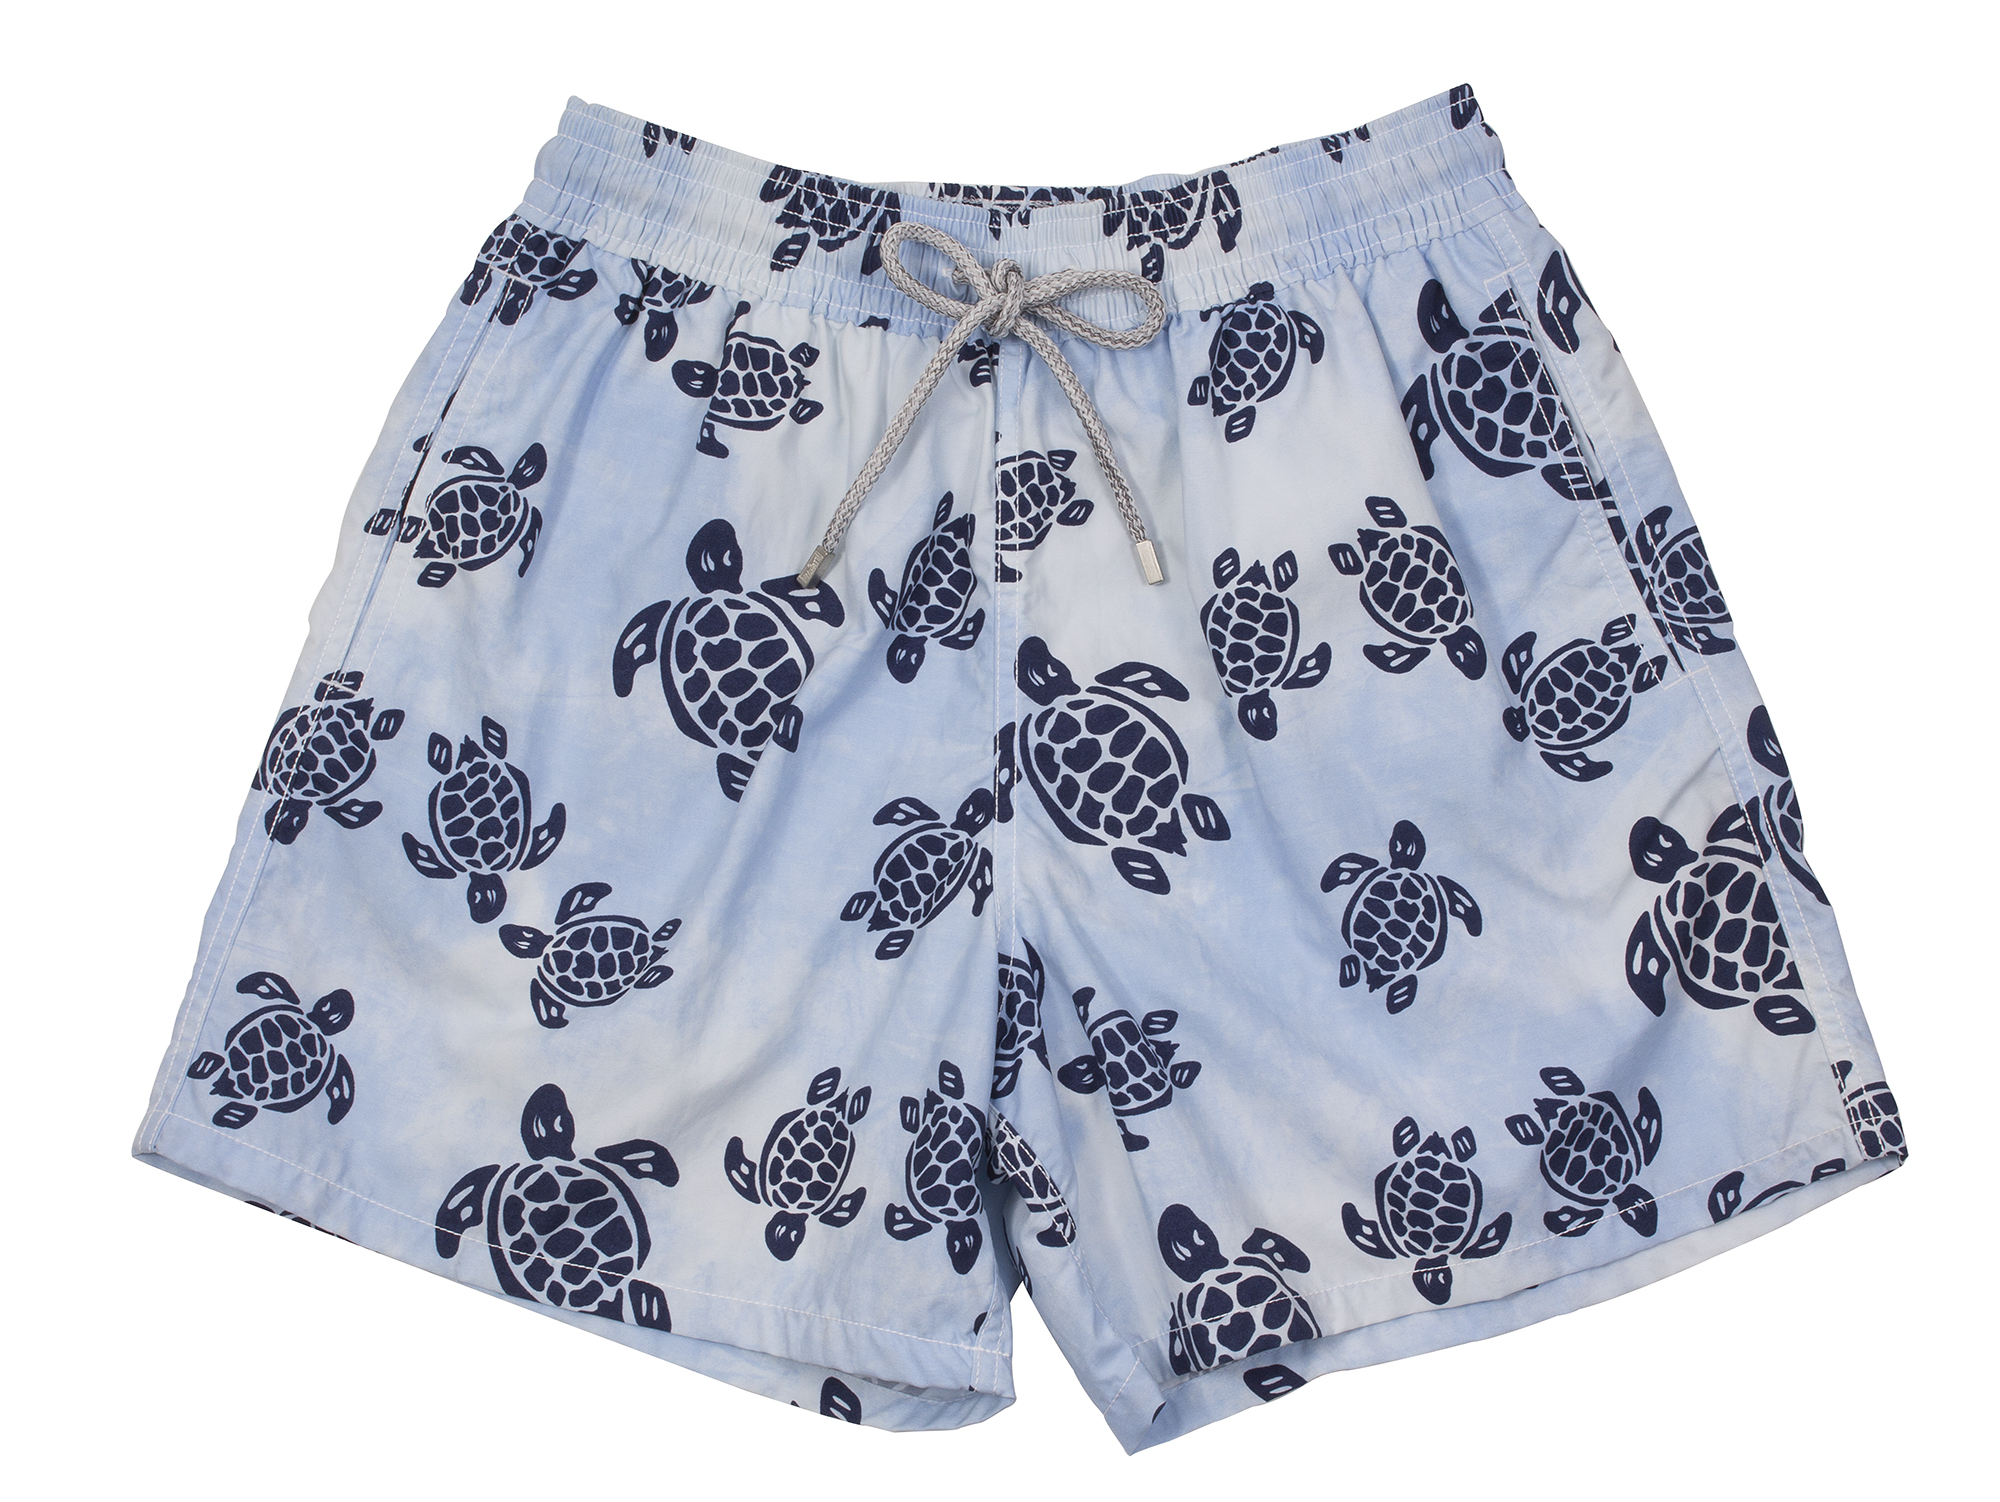 Vilbrequin &quot;Moorea Flocked Turtles&quot; swim trunks in &quot;sky blue,&quot; $280 at Gwynn&#039;s of Mount Pleasant